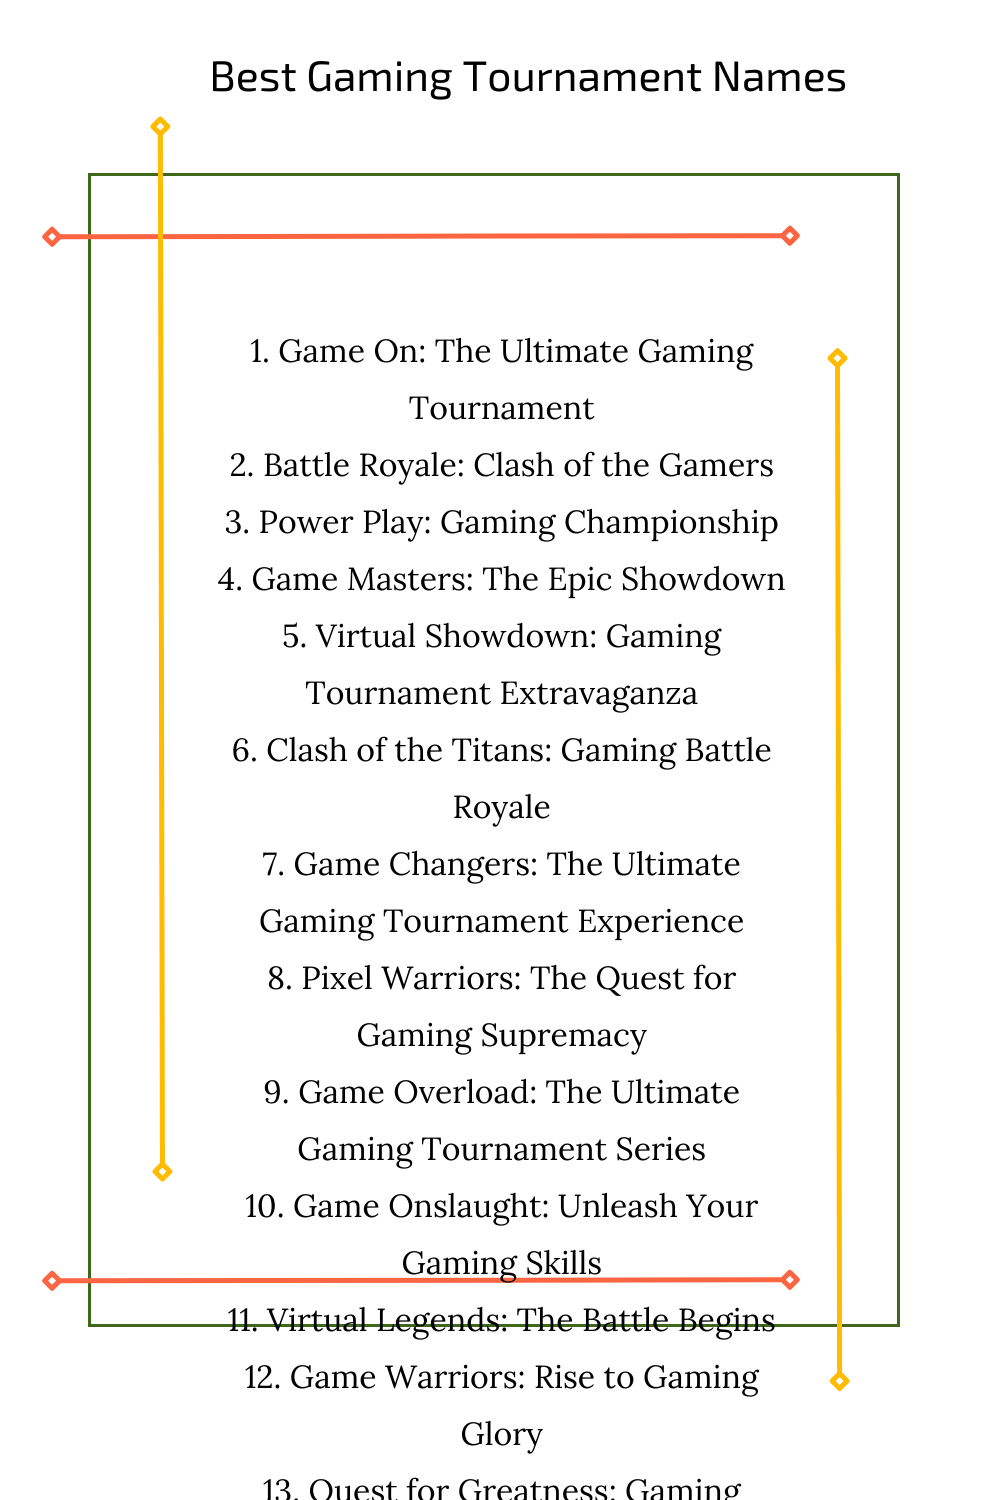 Best Gaming Tournament Names